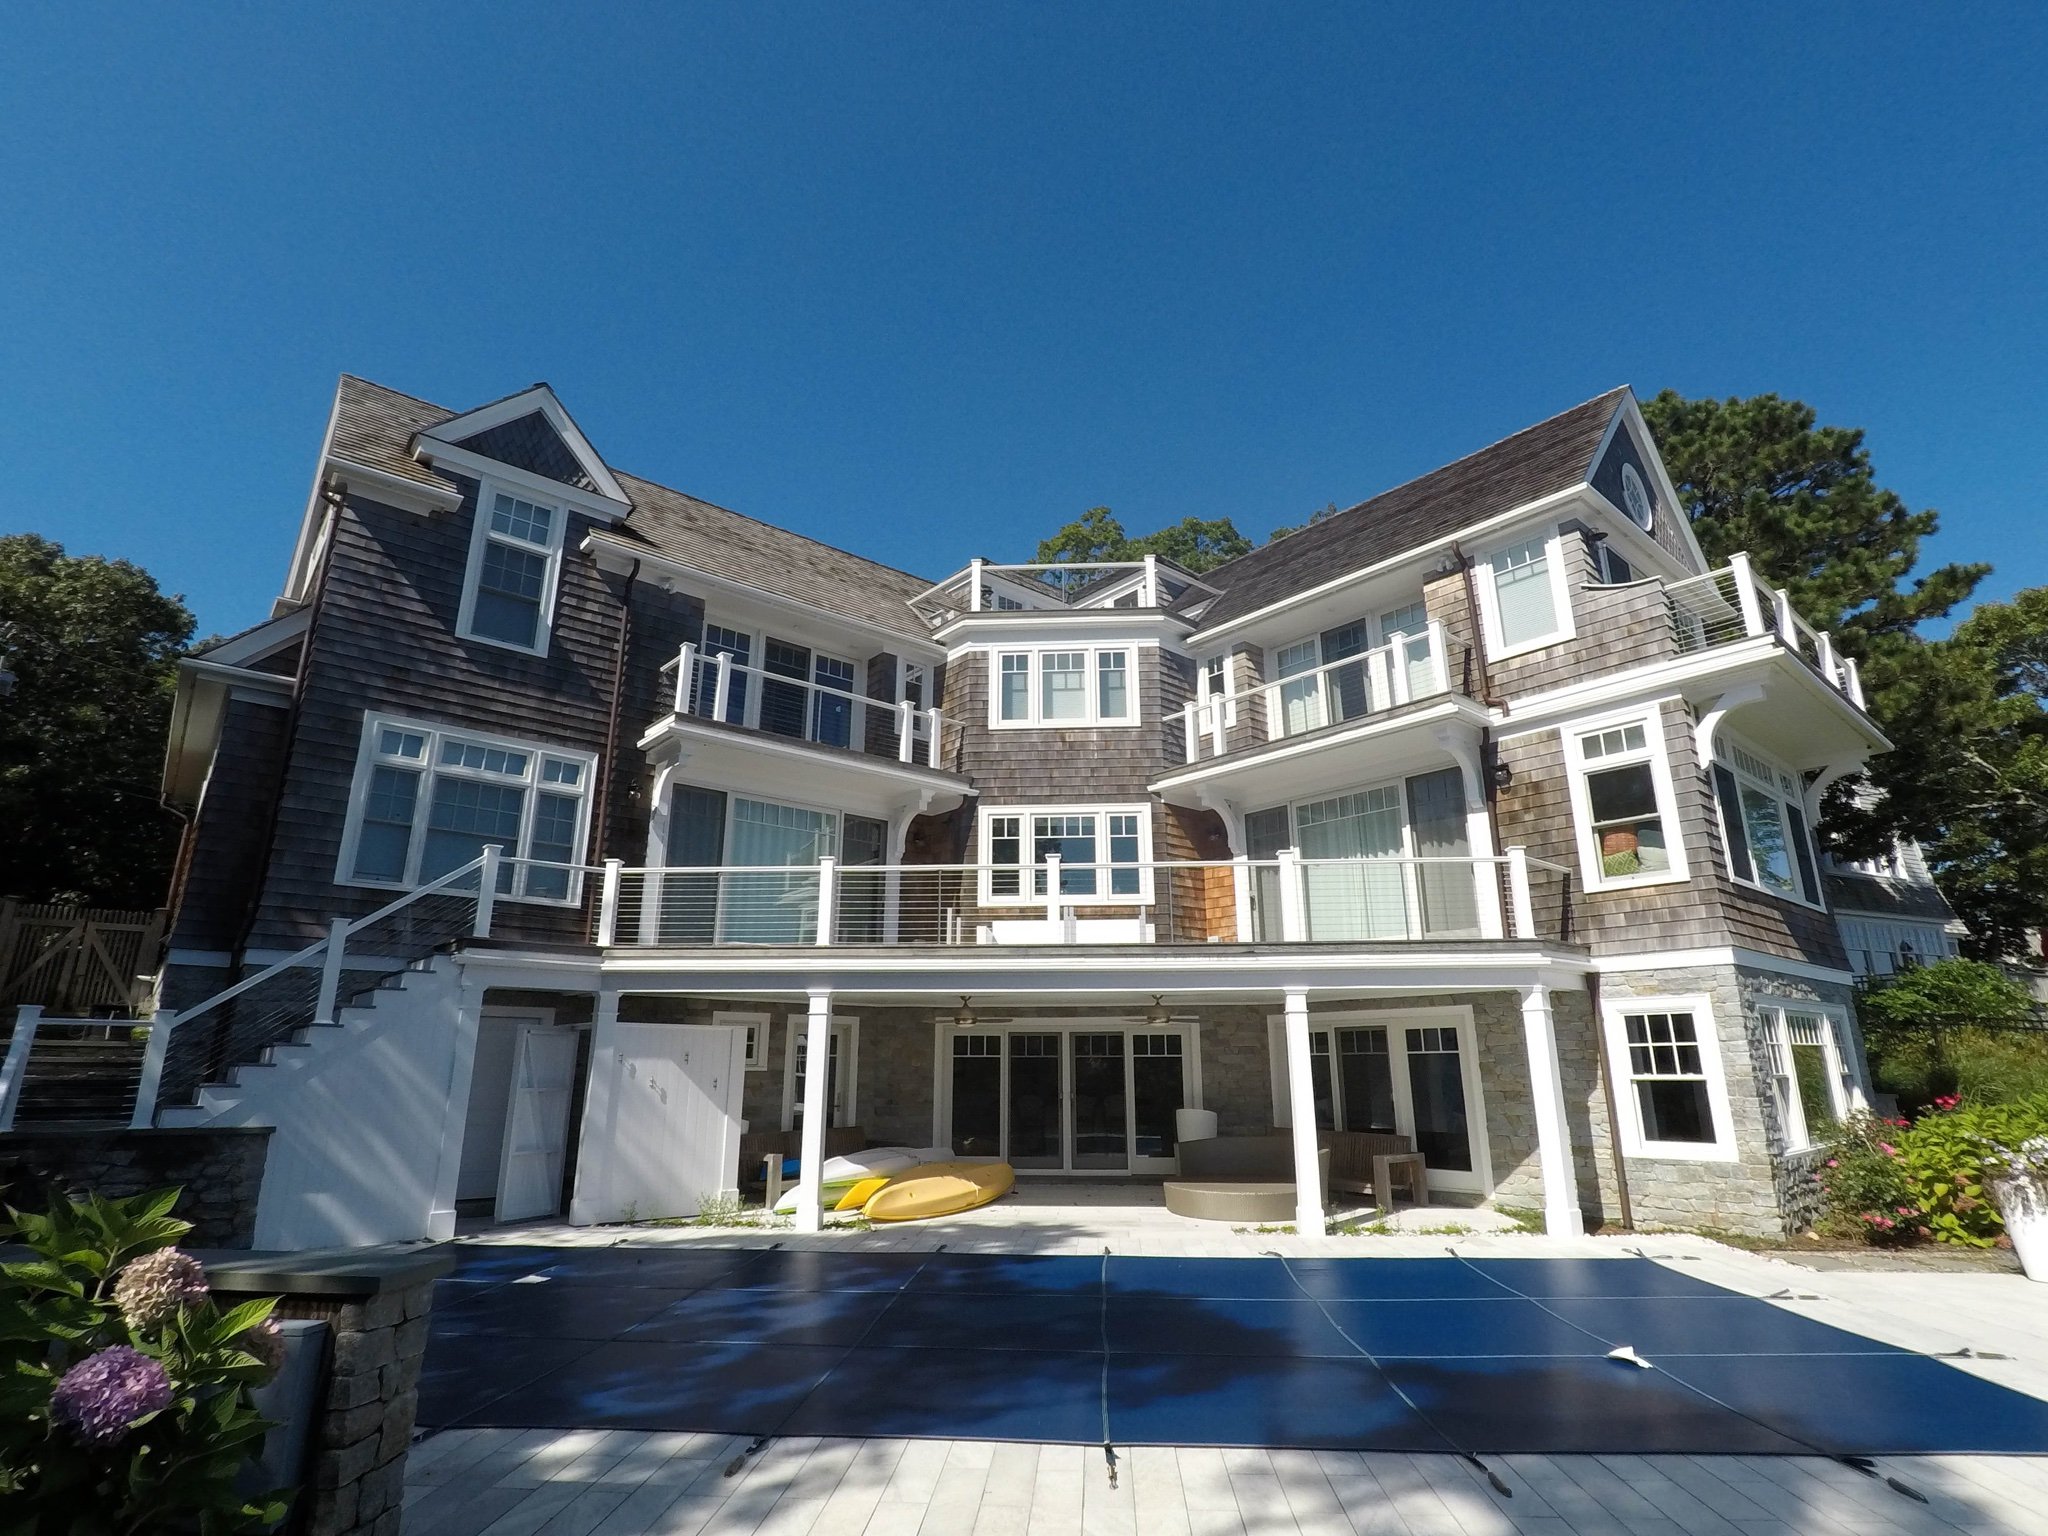 Large three level custom Cape Cod home with outdoor pool patio